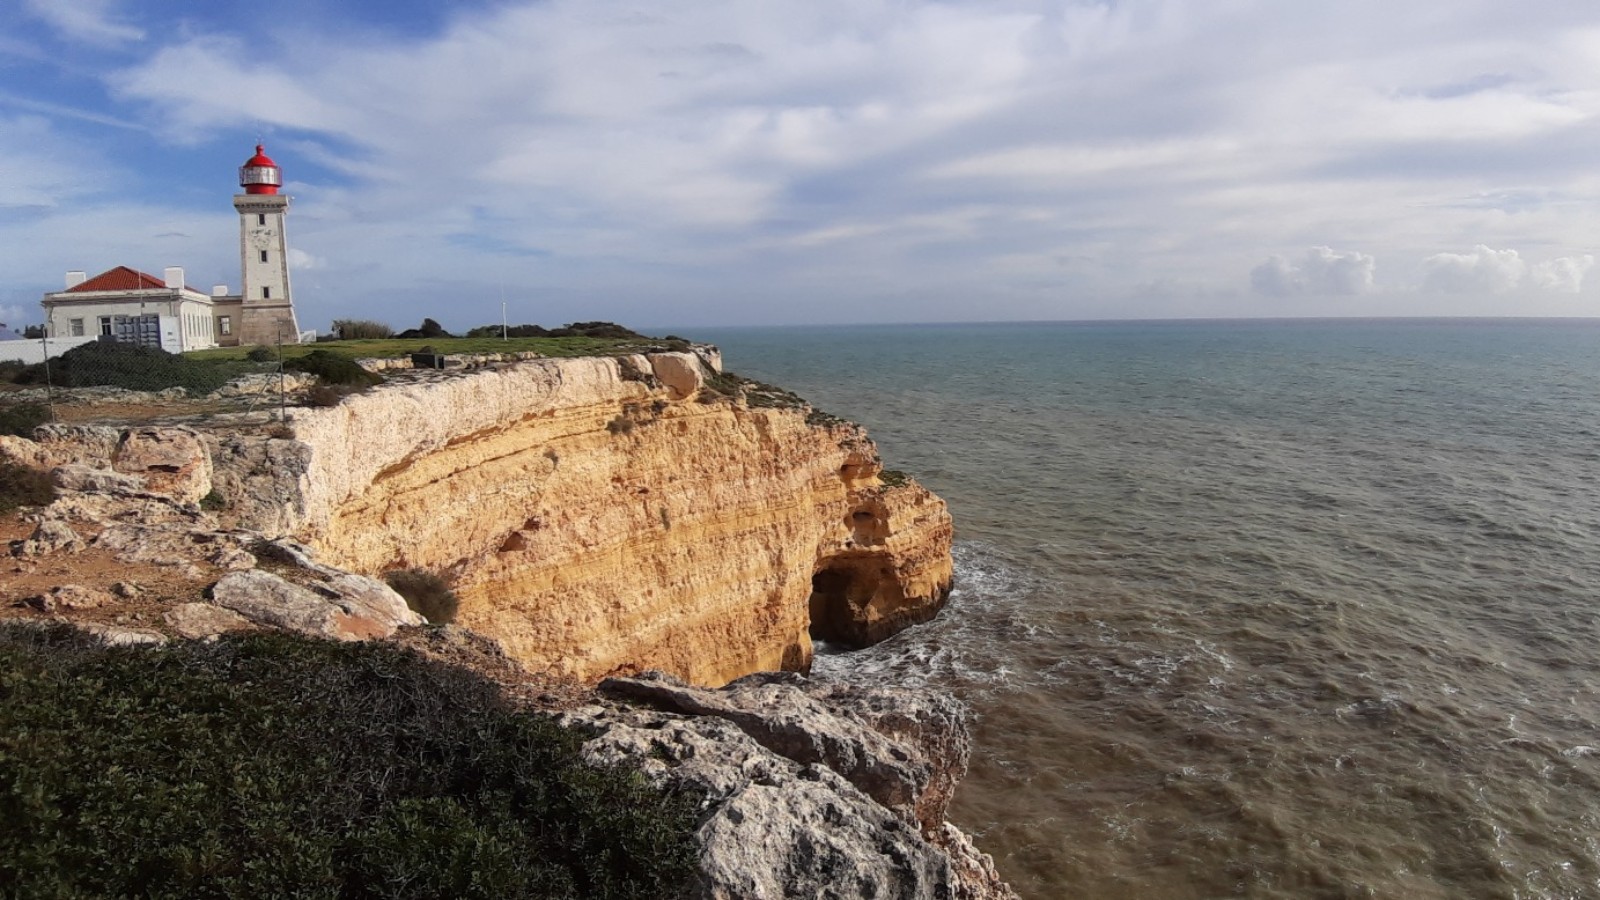 Hike-in-the-Algarve-lighthouse